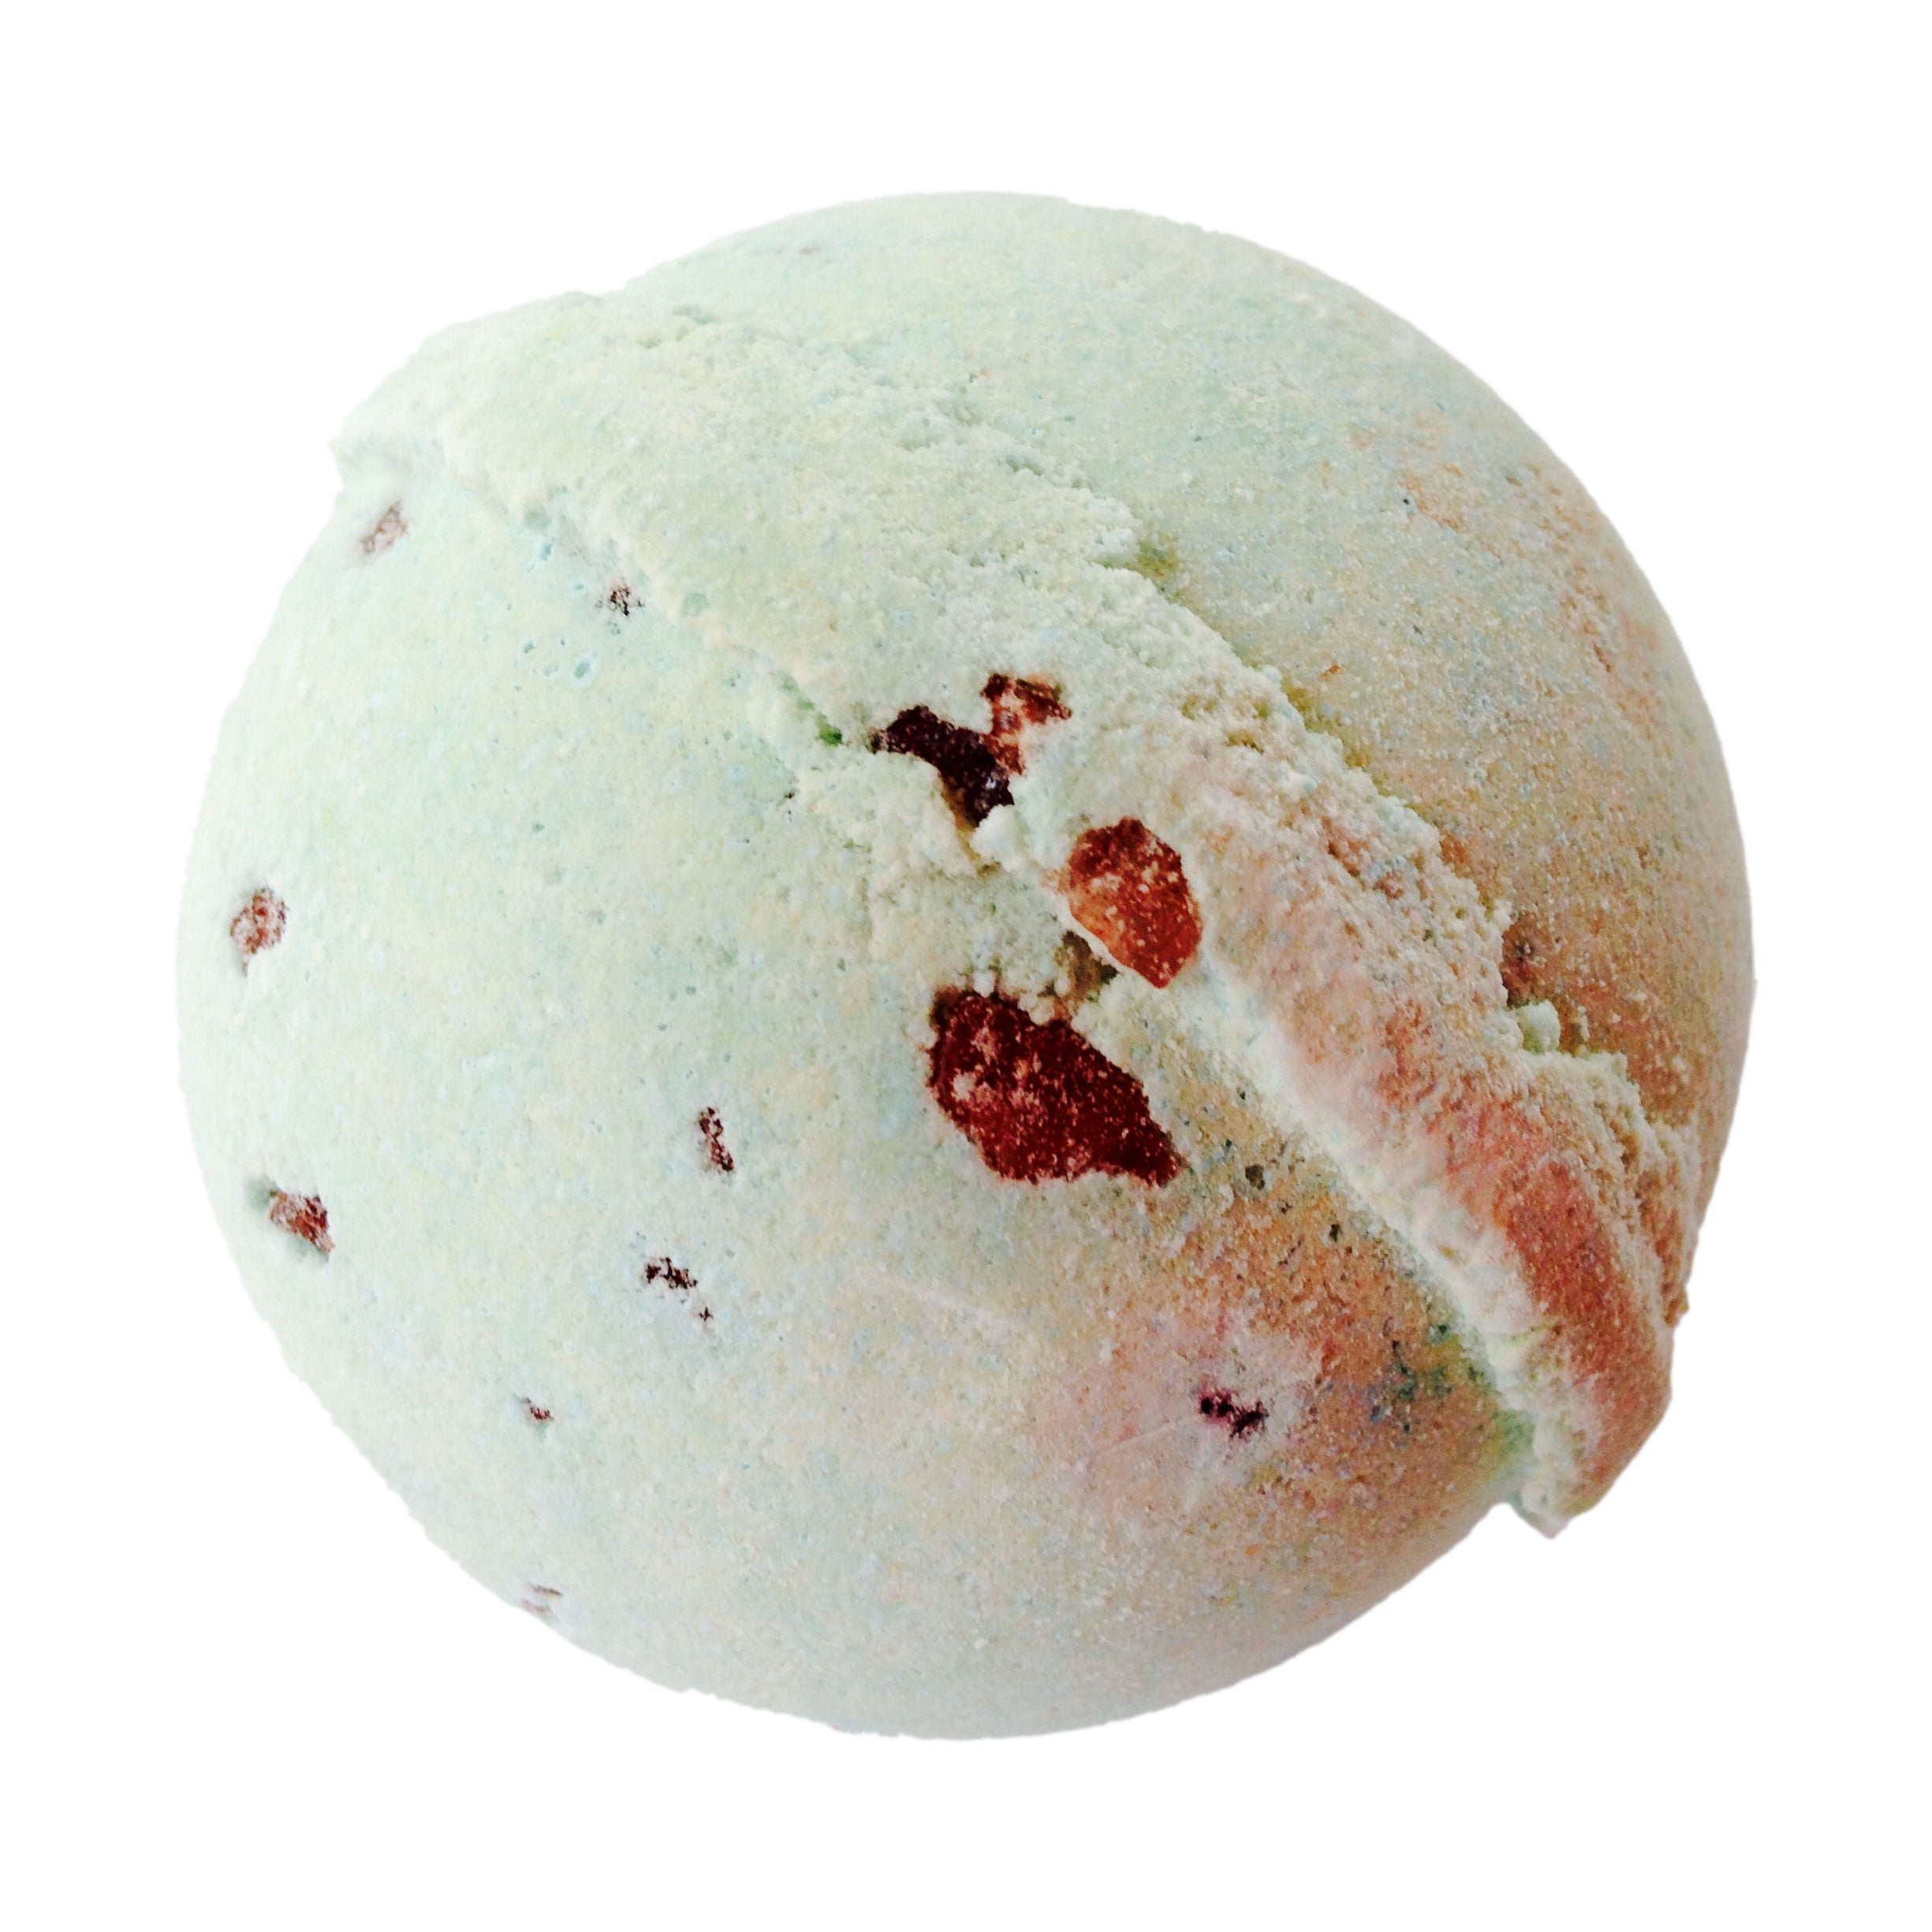 MINT CHIP with Wakame, Bath Bomb Made with Sea Weed and Peppermint Bath Bomb By Soapie Shoppe